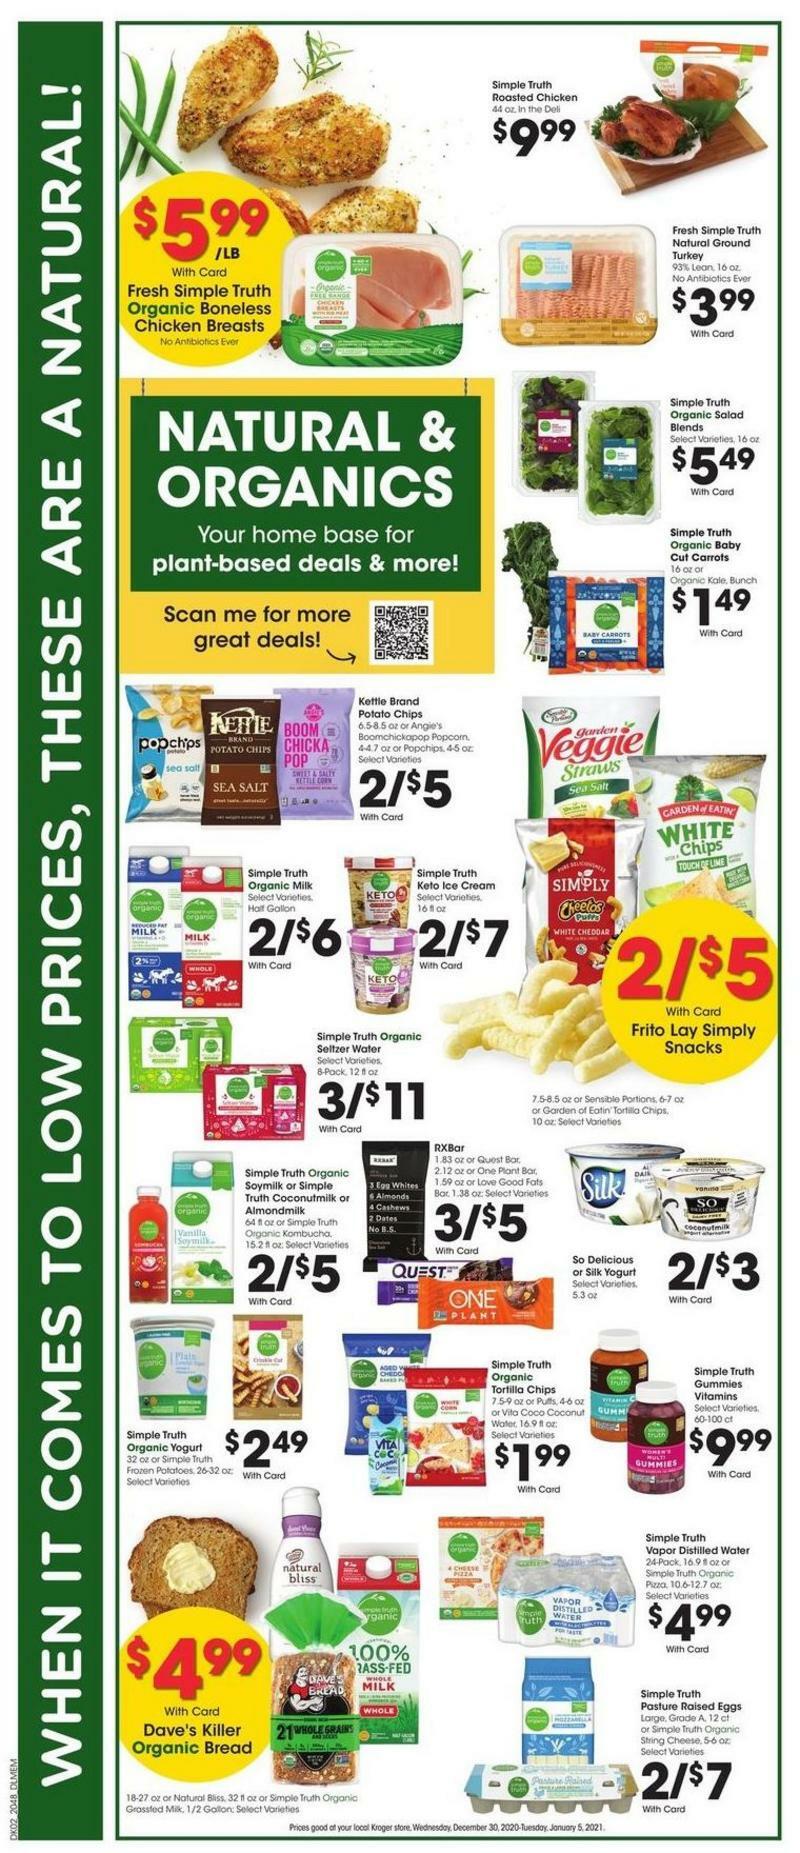 Kroger Weekly Ad from December 30